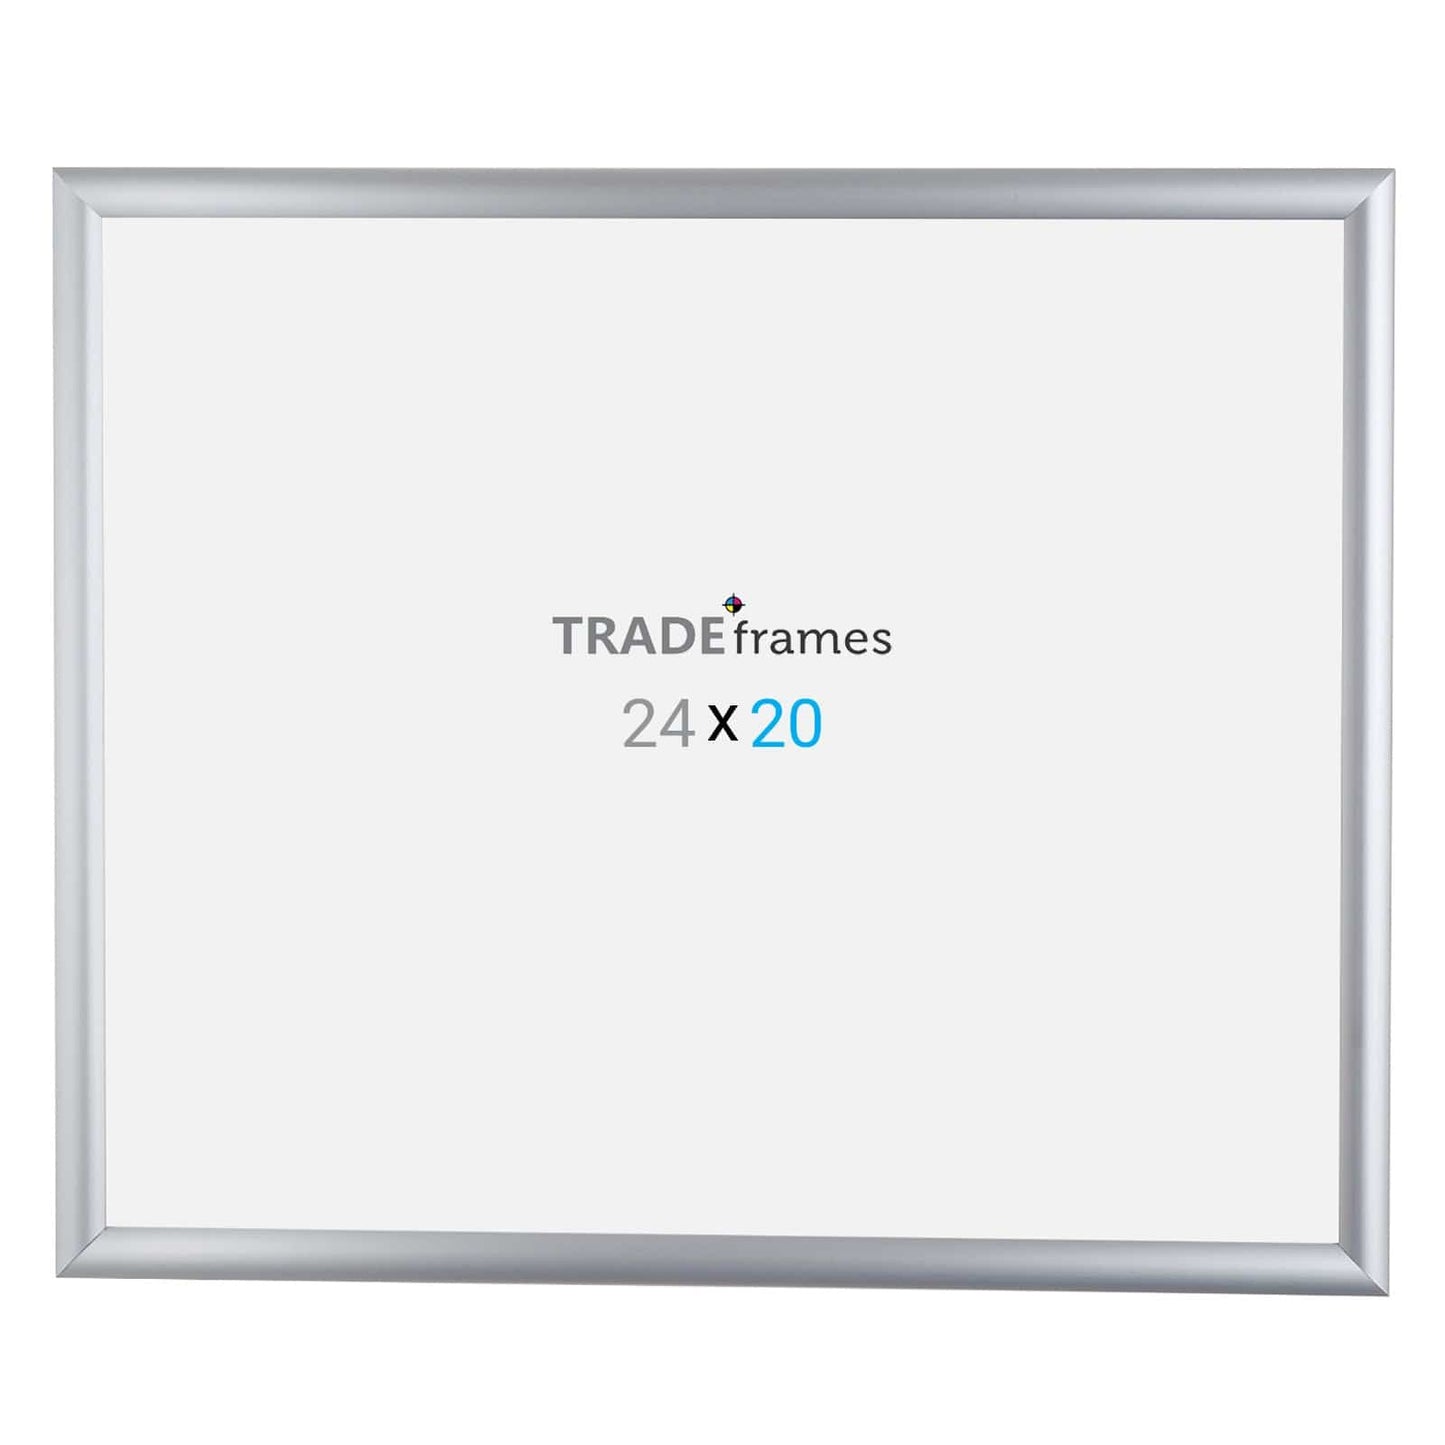 20x24  TRADEframe Silver Snap Frame 20x24 - 1 inch profile - Snap Frames Direct